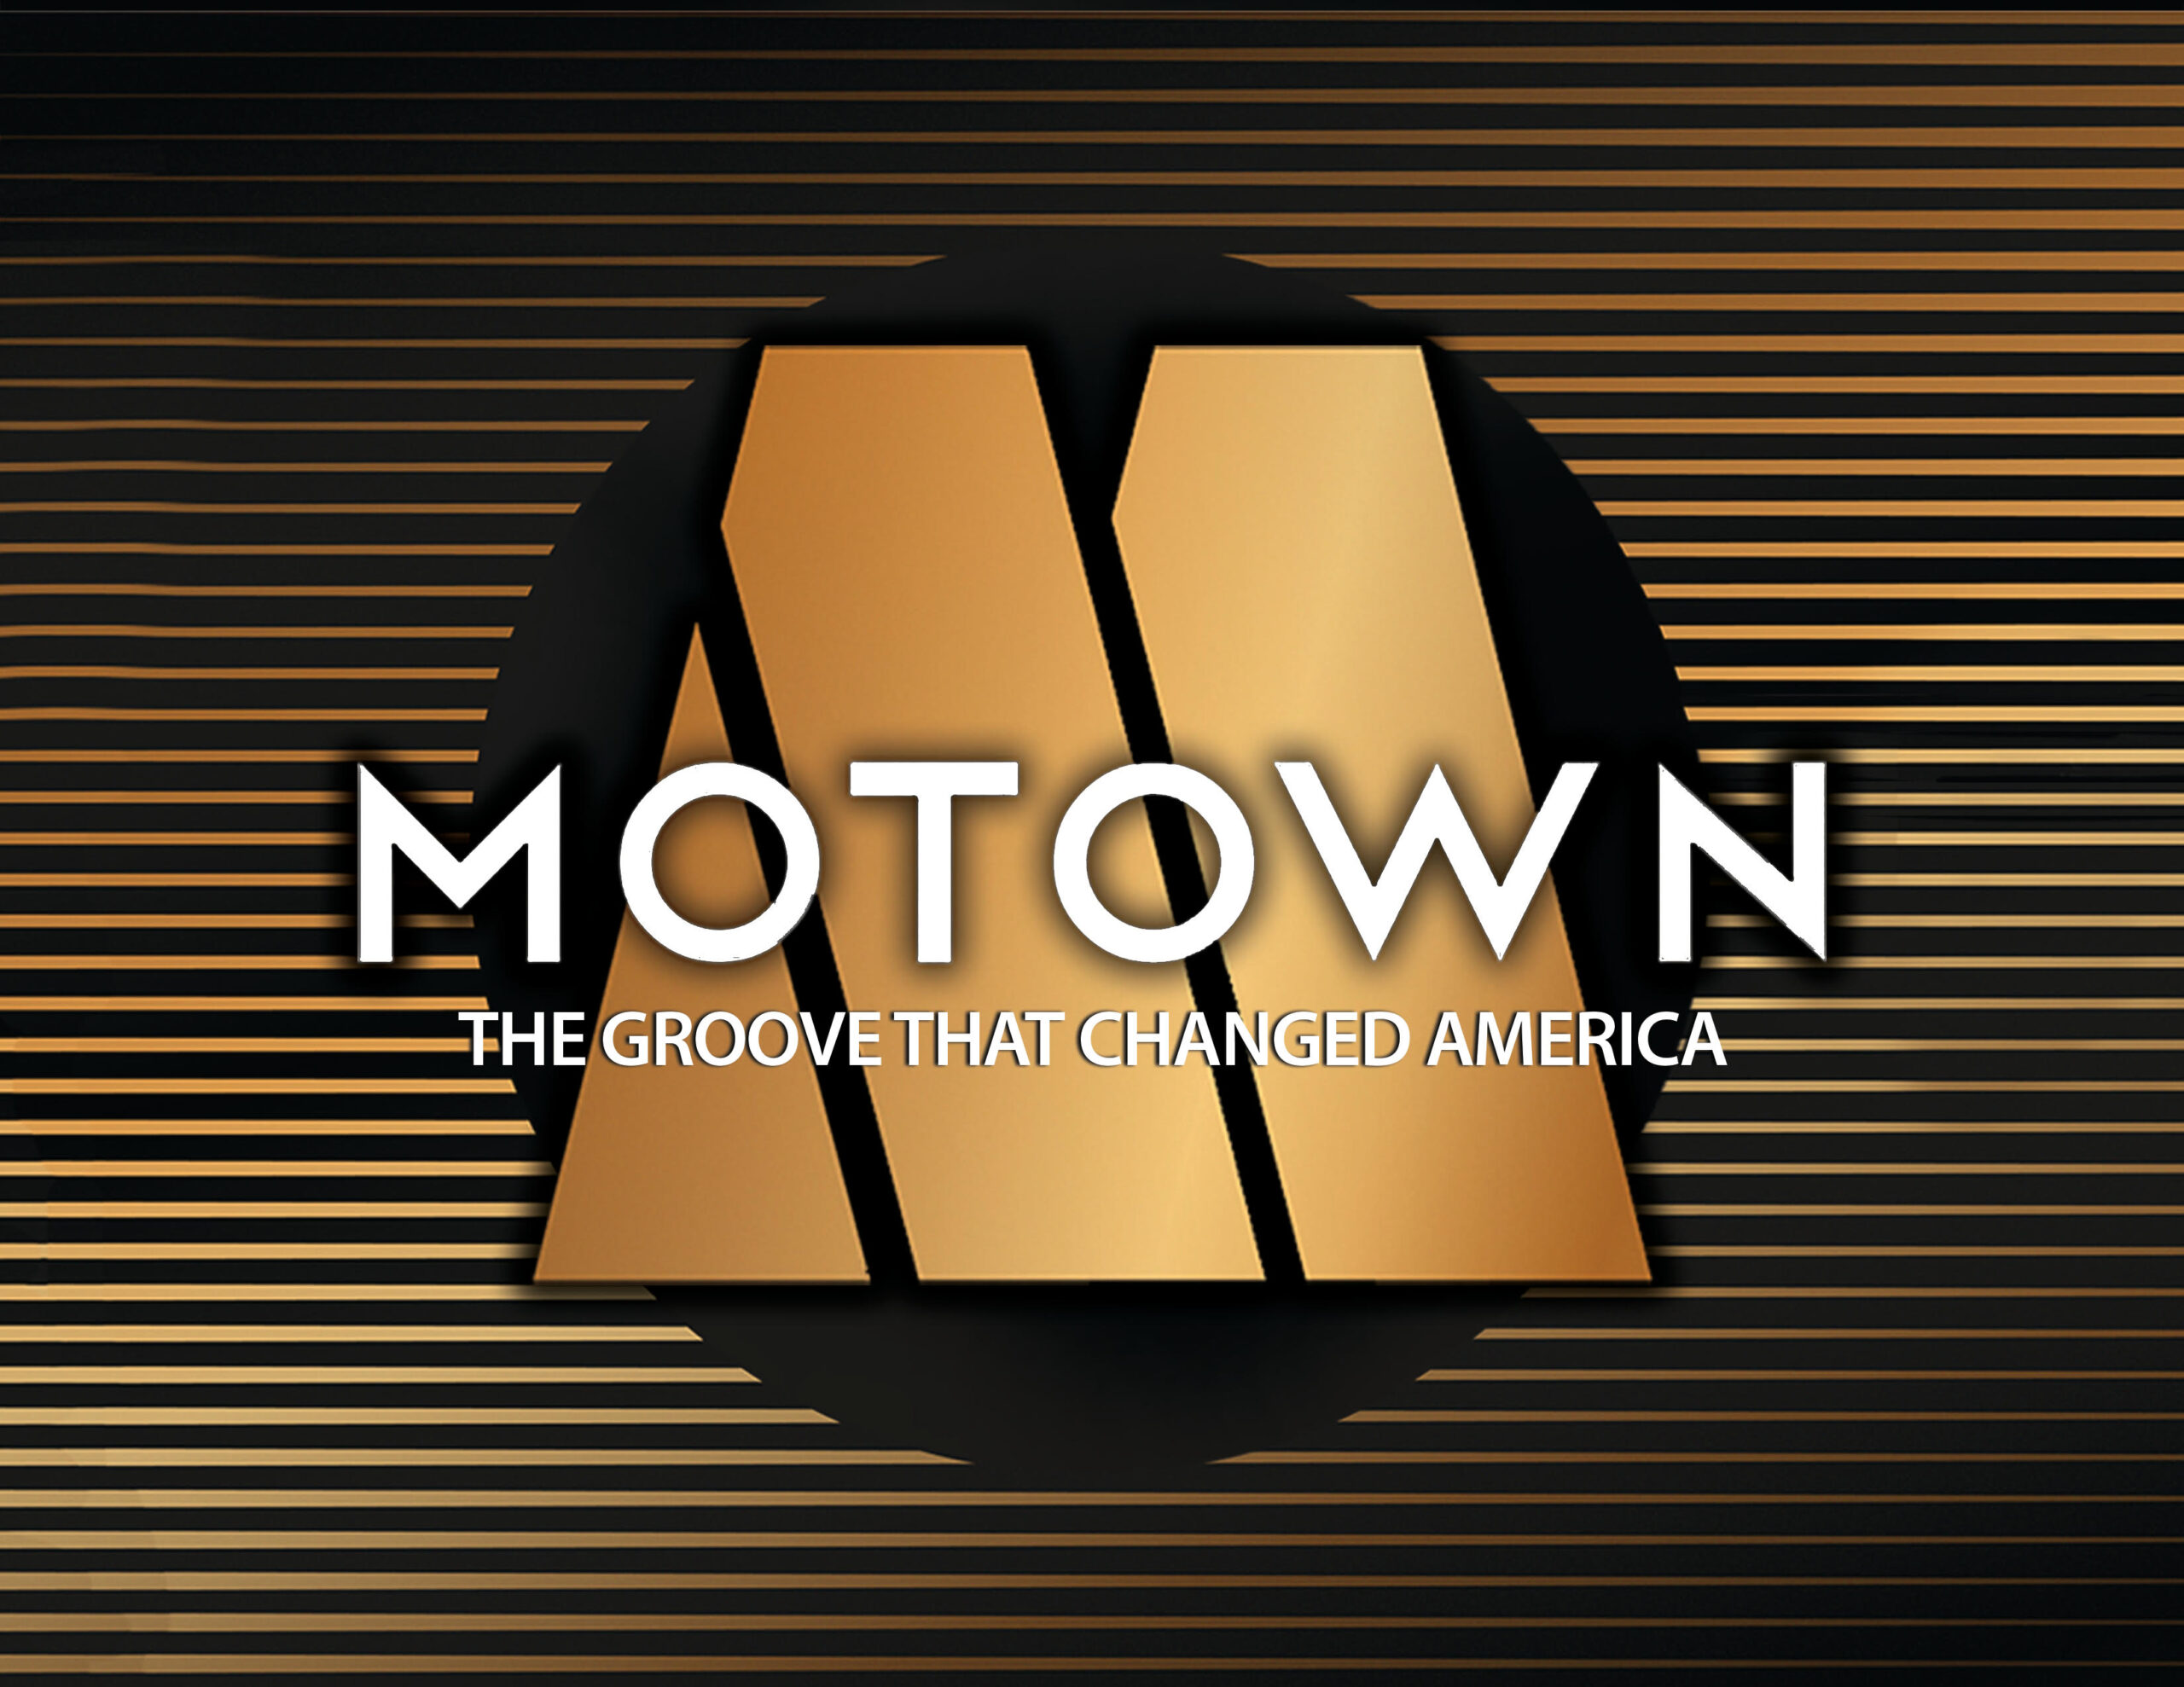 MOTOWN: THE GROOVE THAT CHANGED AMERICA - California Center for